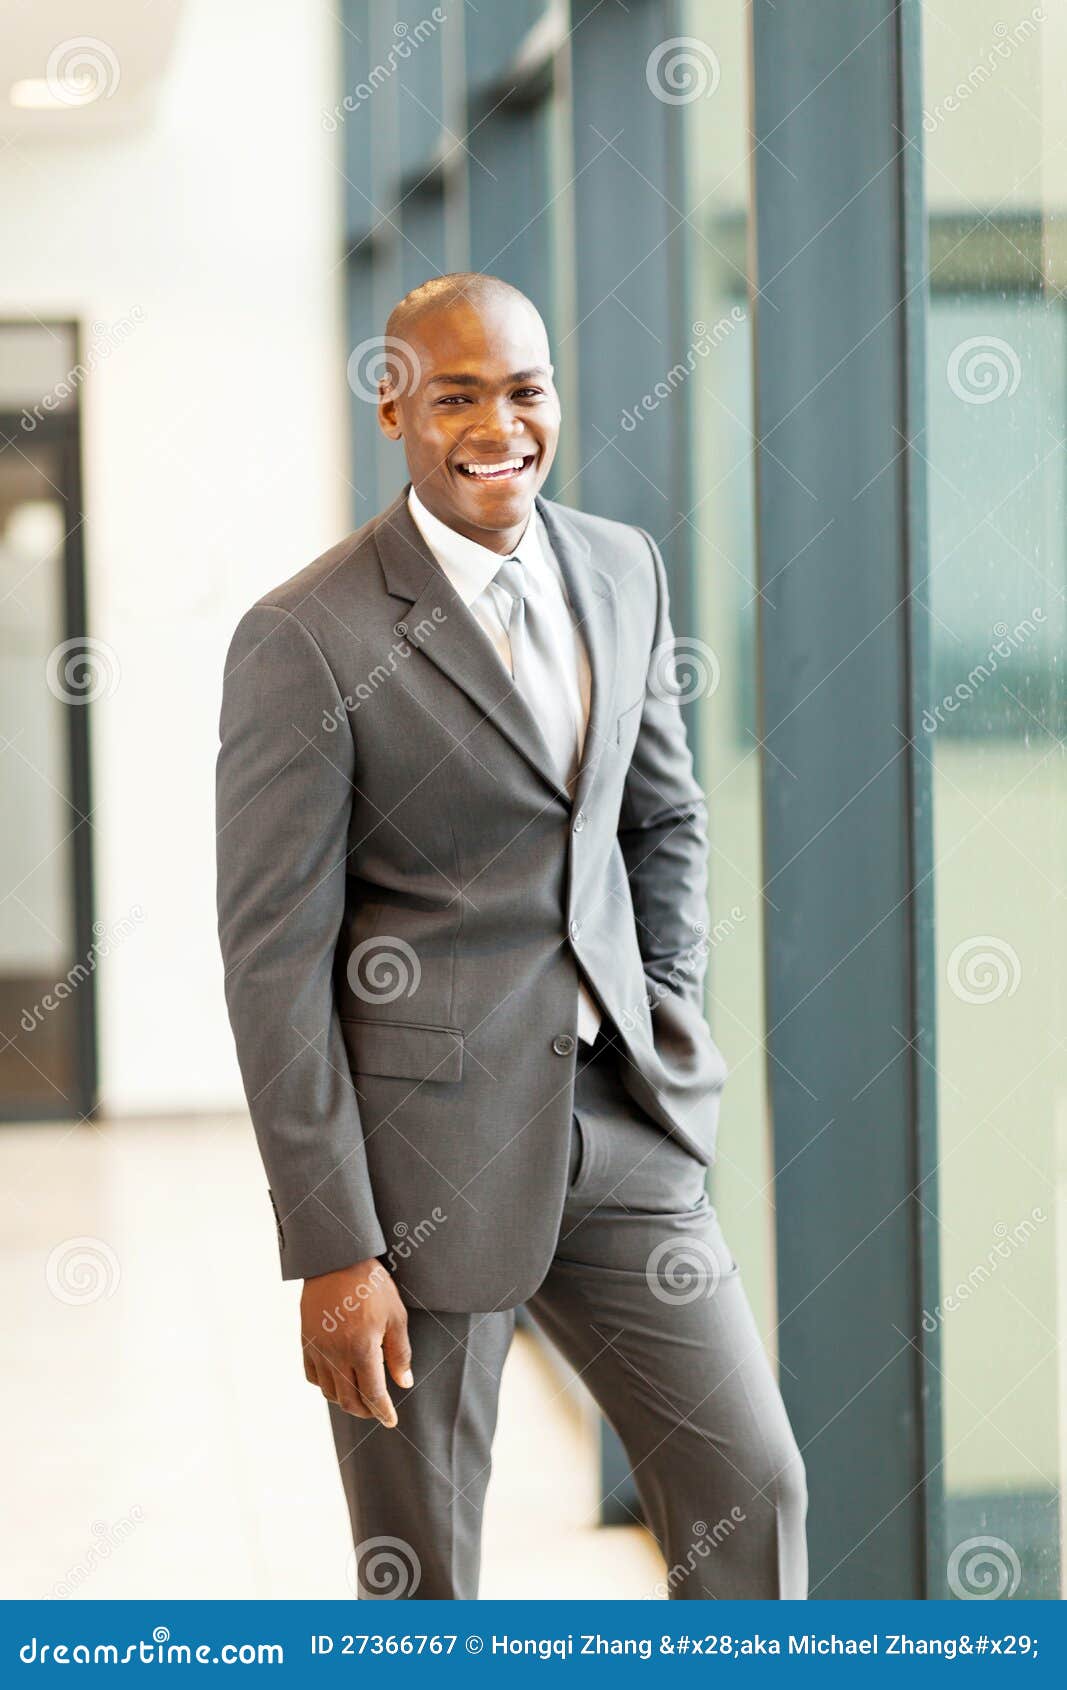 African business executive stock image. Image of collar - 27366767